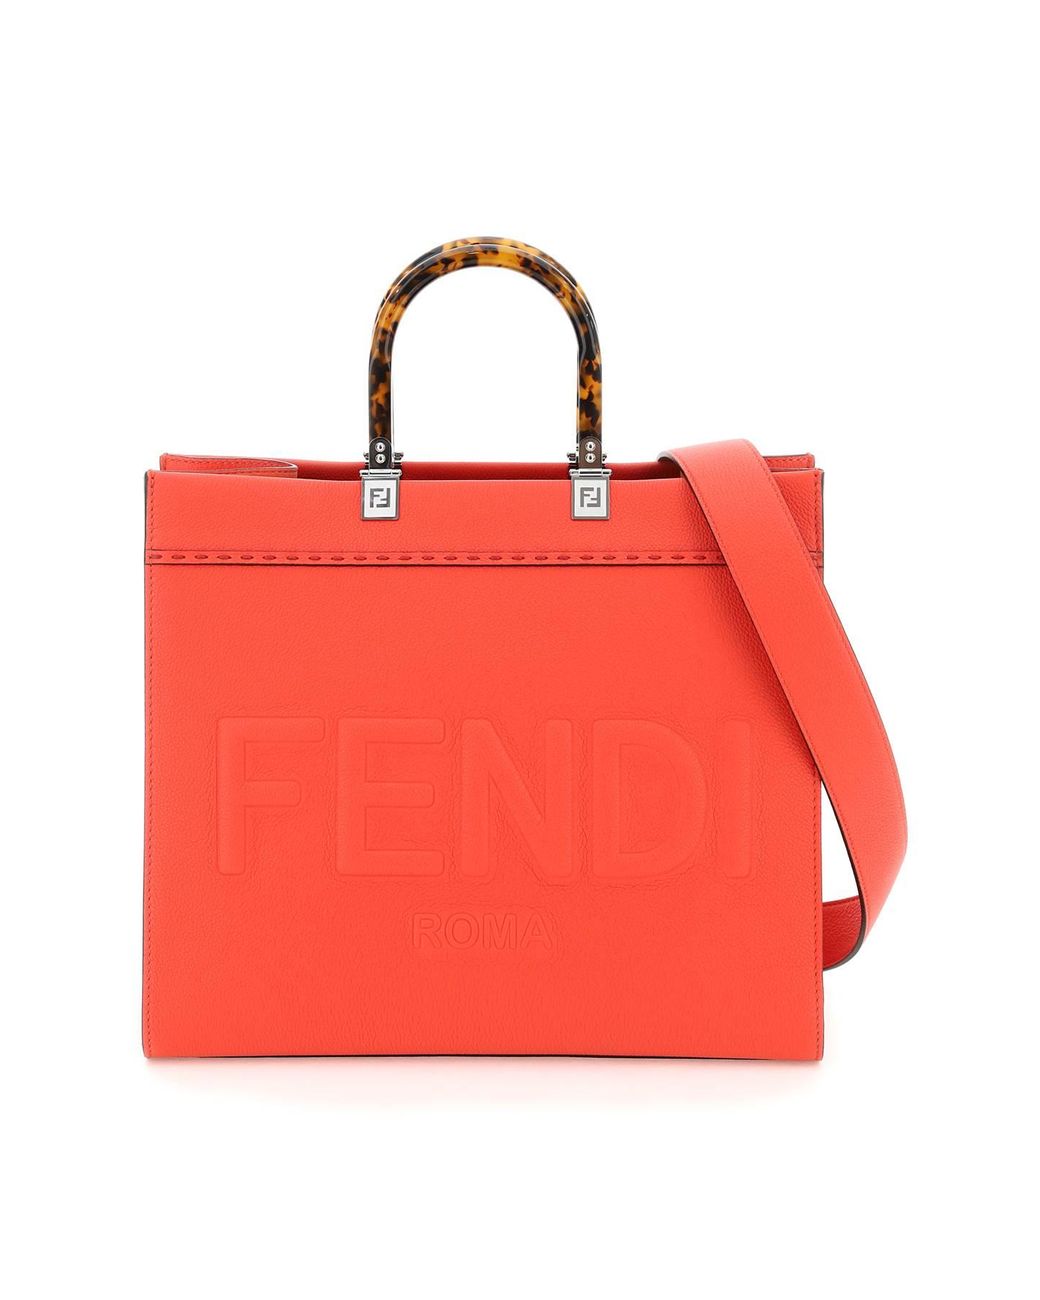 Fendi Grained Leather Sunshine Medium Tote Bag in Red | Lyst